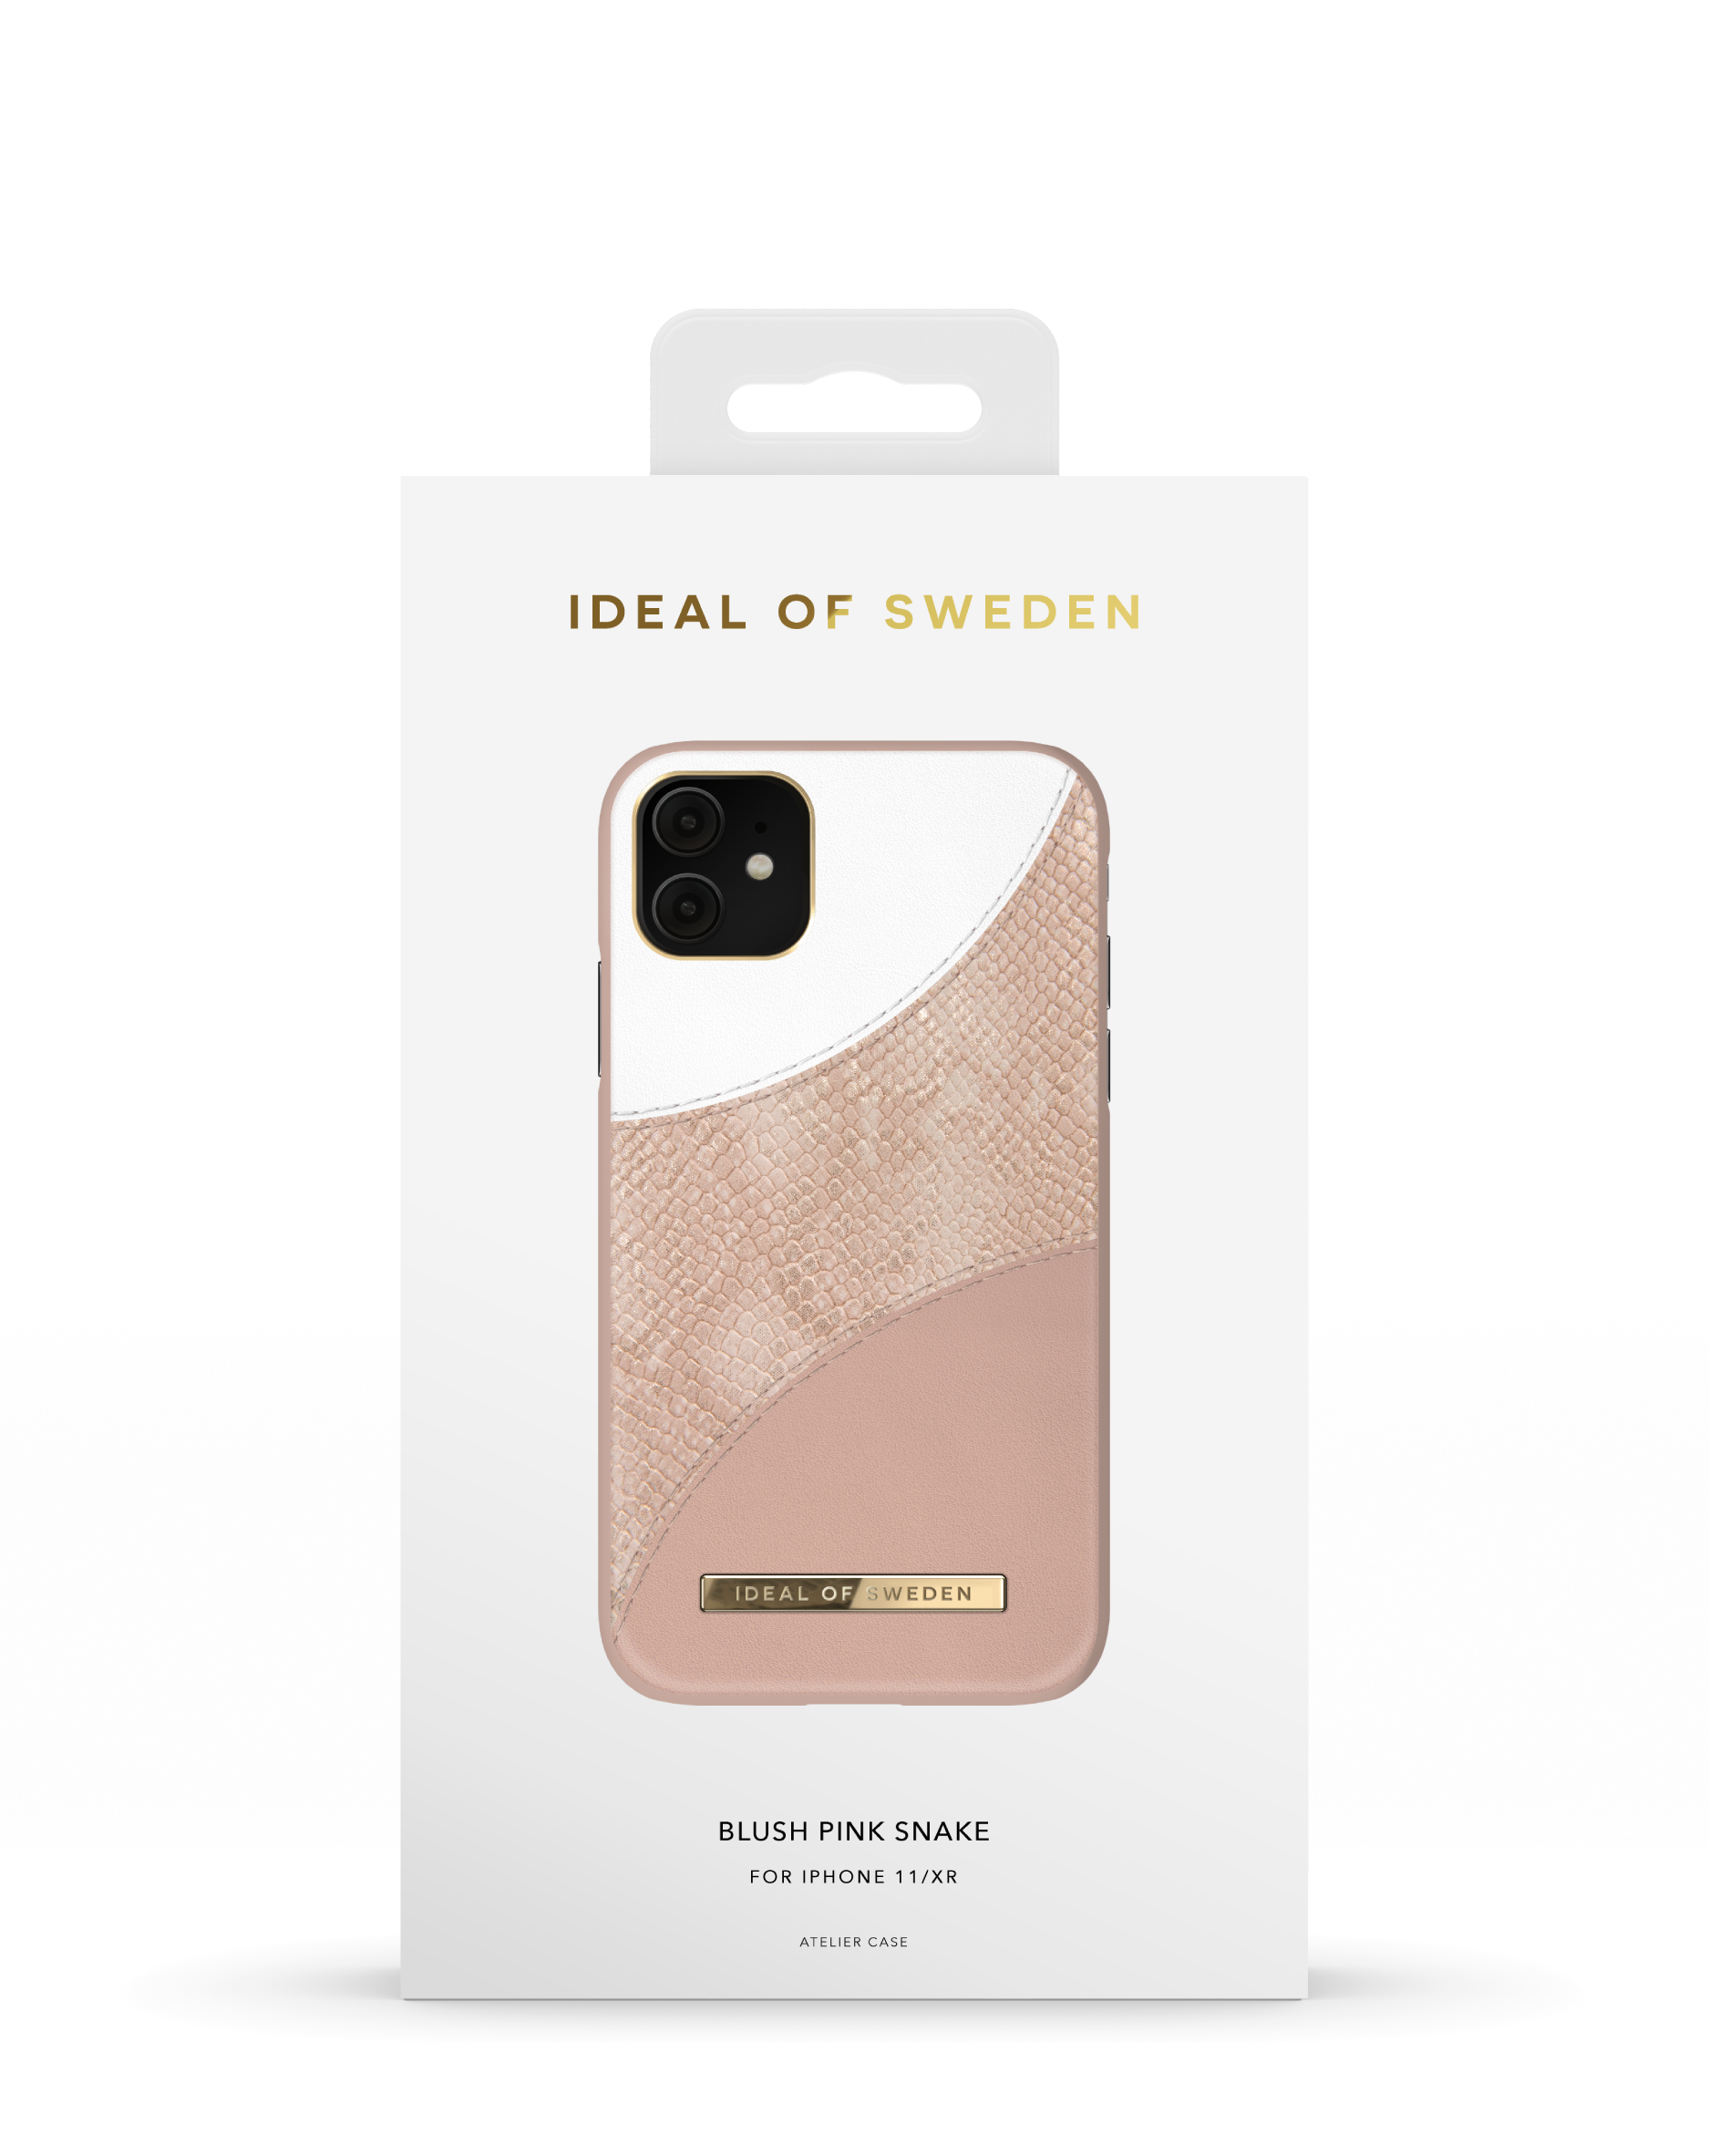 IDACSS21-I1961-269, Snake 11, Blush SWEDEN Apple, iPhone iPhone Apple Backcover, Pink Apple XR, OF IDEAL